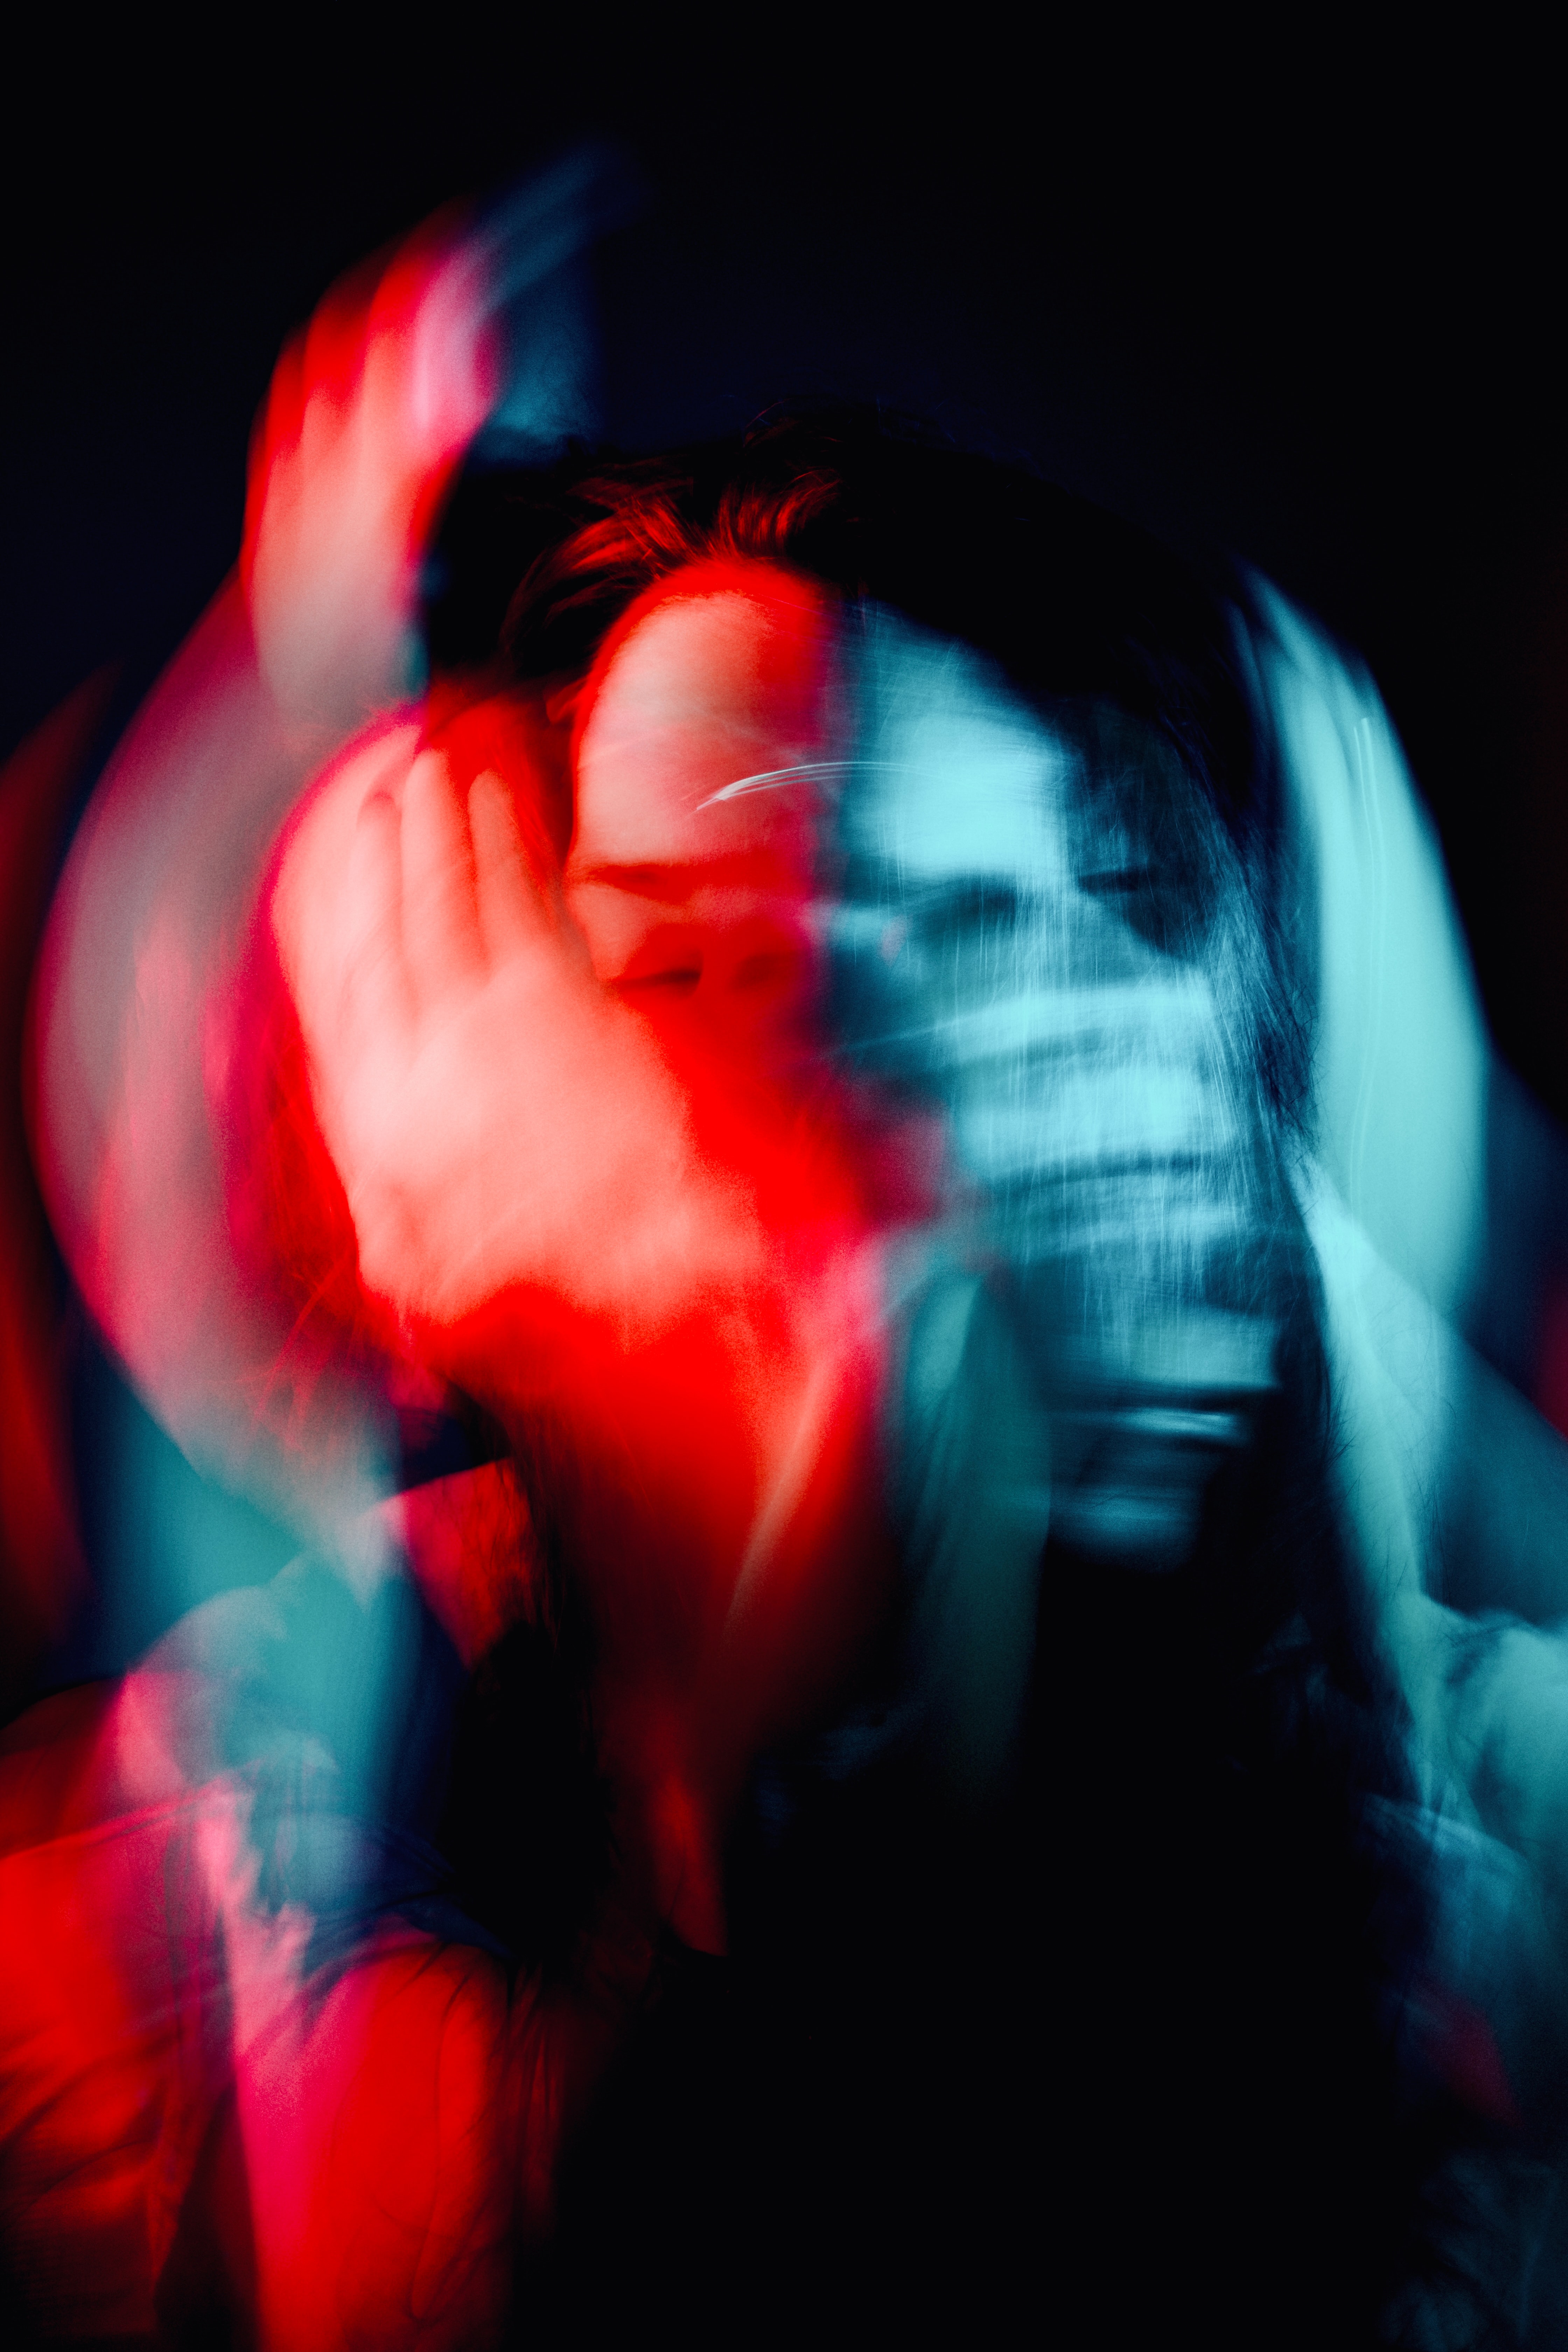 Abstract, diptych image of a woman in red and blue light